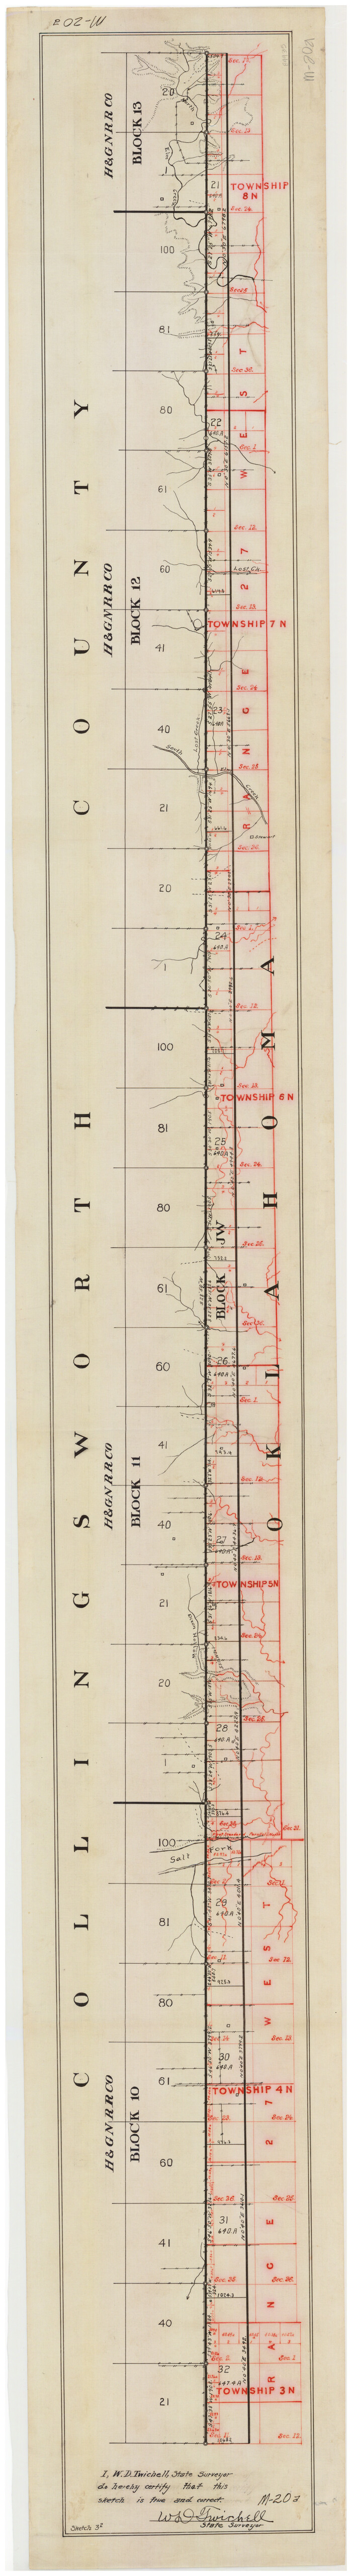 89663, [Sketch Between Collingsworth County and Oklahoma], Twichell Survey Records